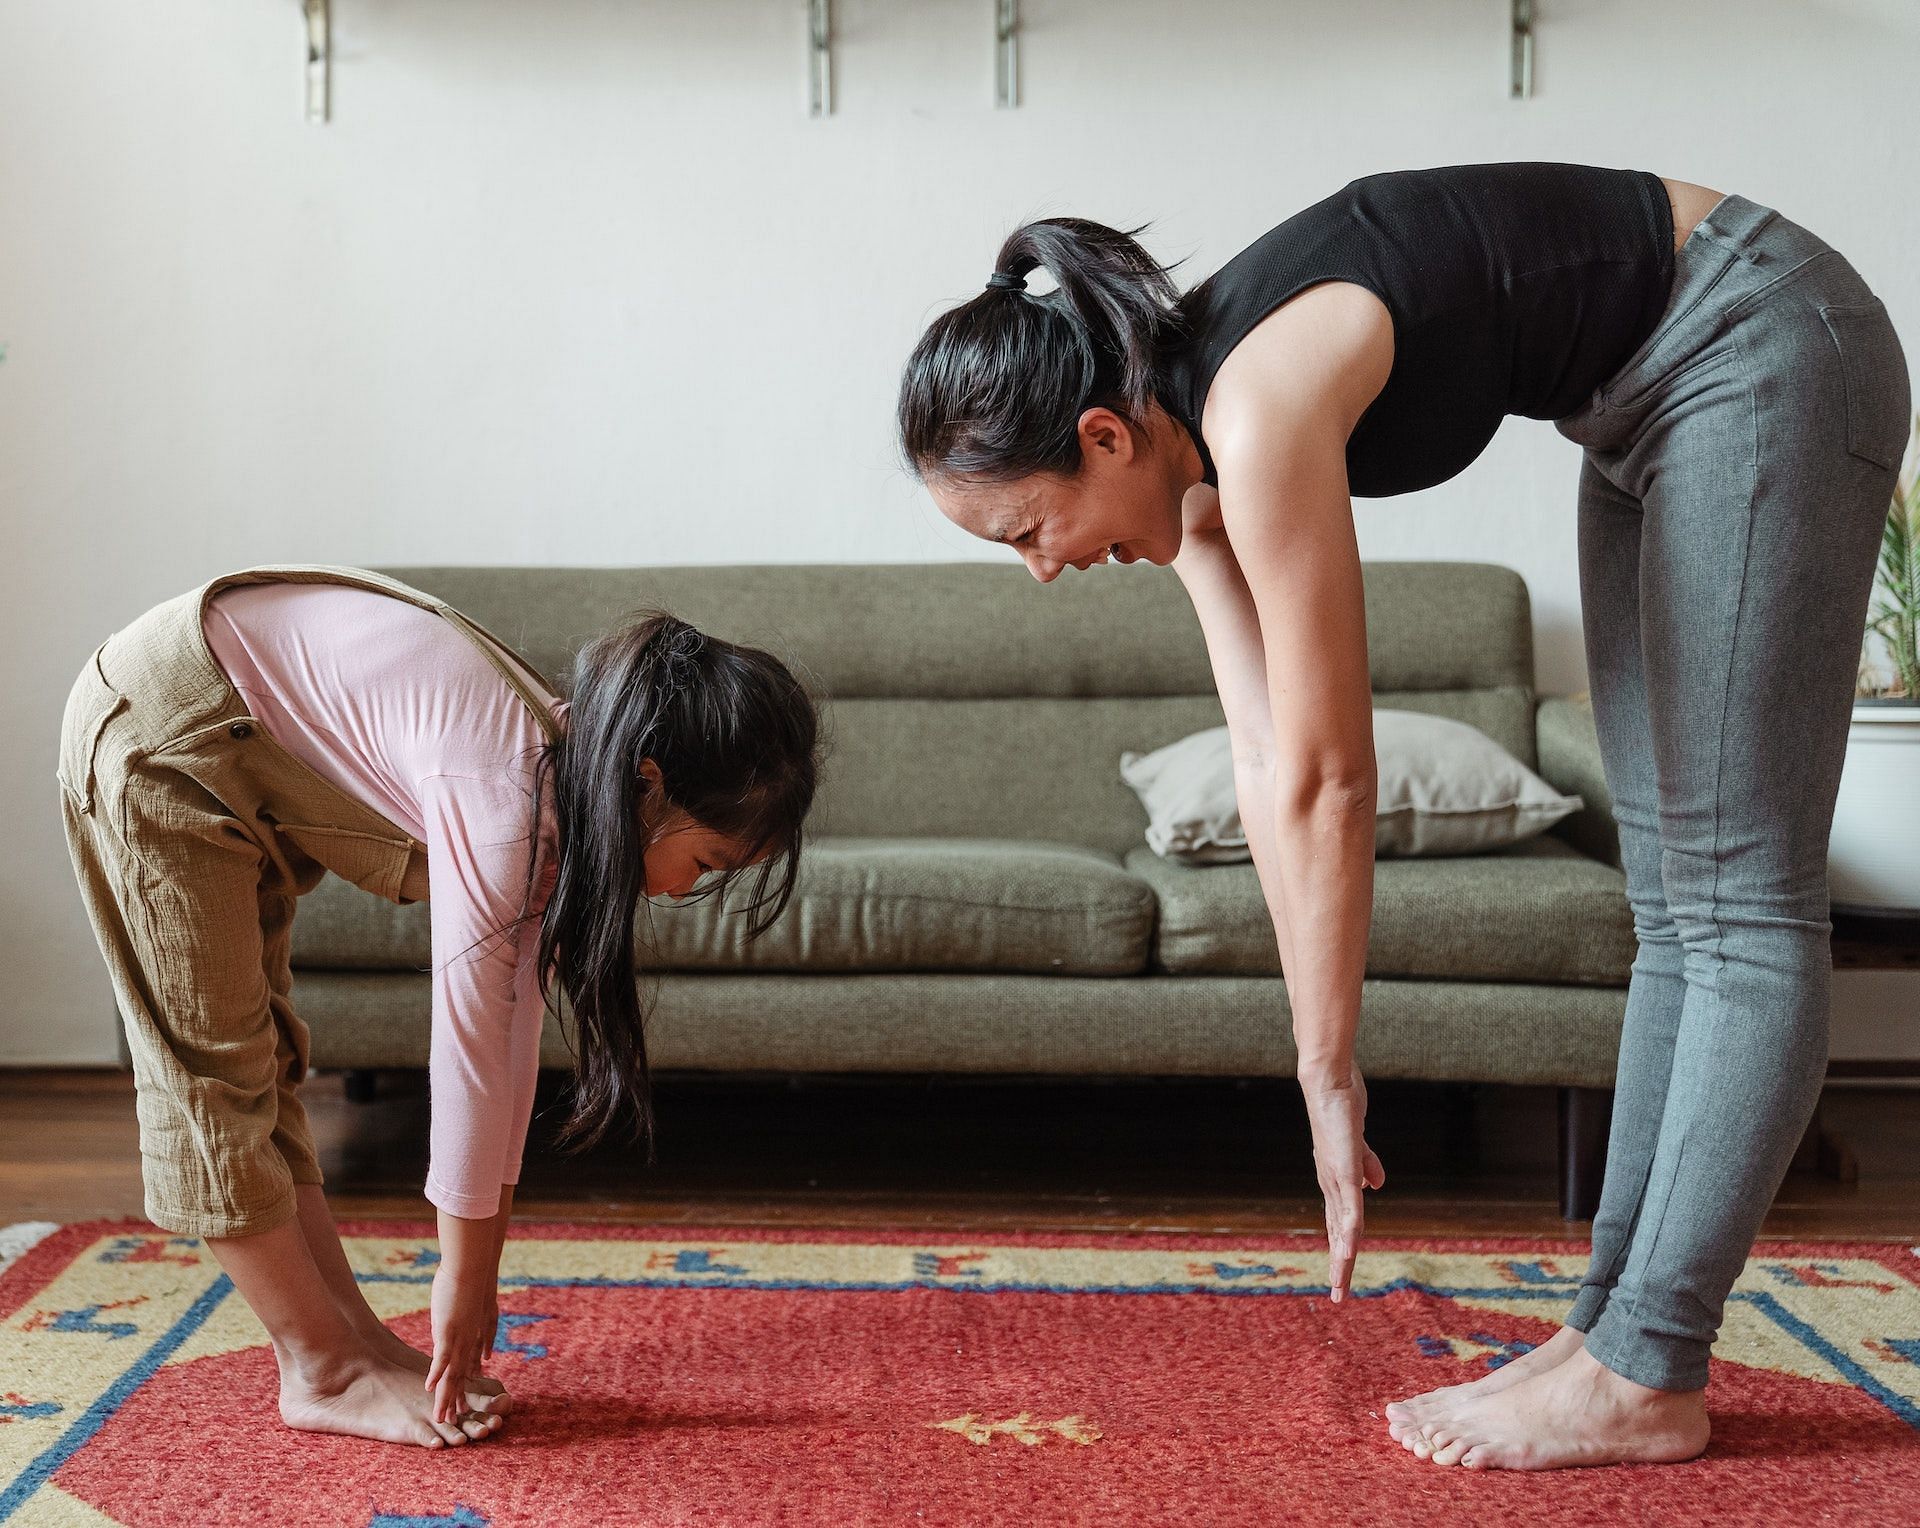 Full-body workouts at home offer great benefits. (Photo via Pexels/Ketut Subiyanto)